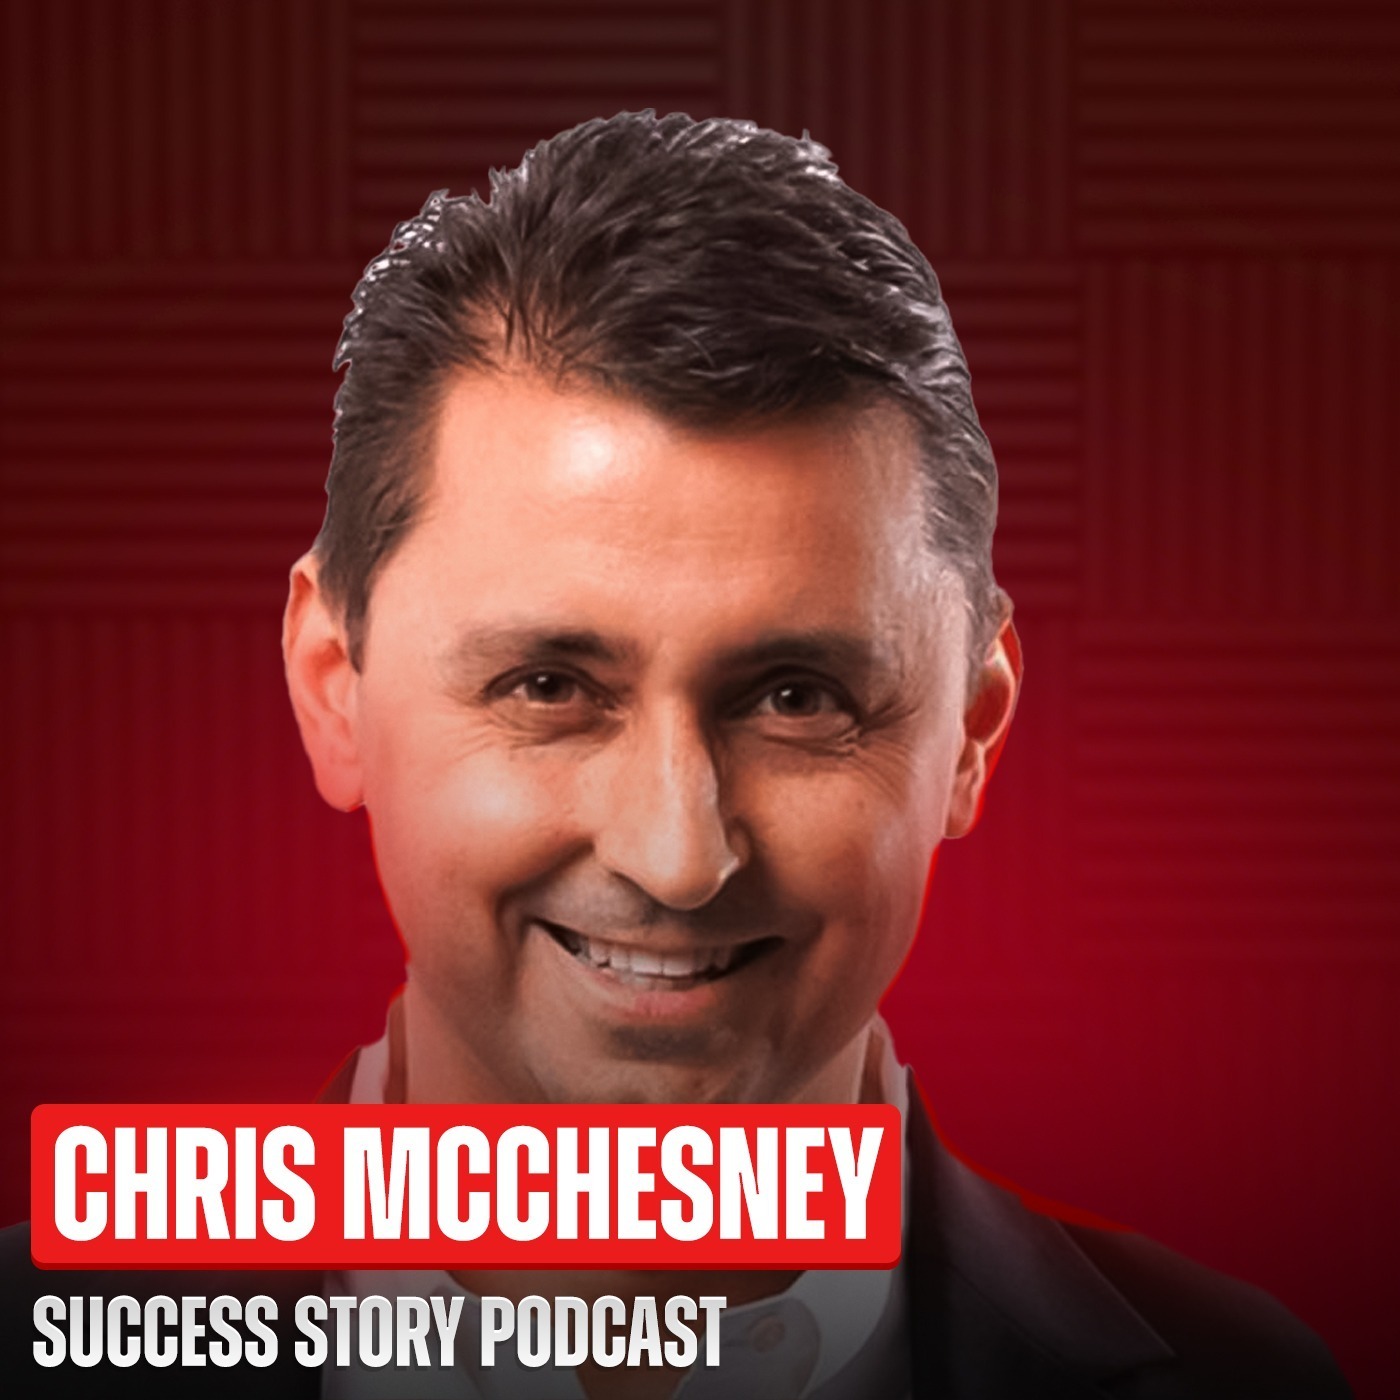 Lessons - Aligning Your Team & Vision | Chris McChesney - WSJ Best Selling Author